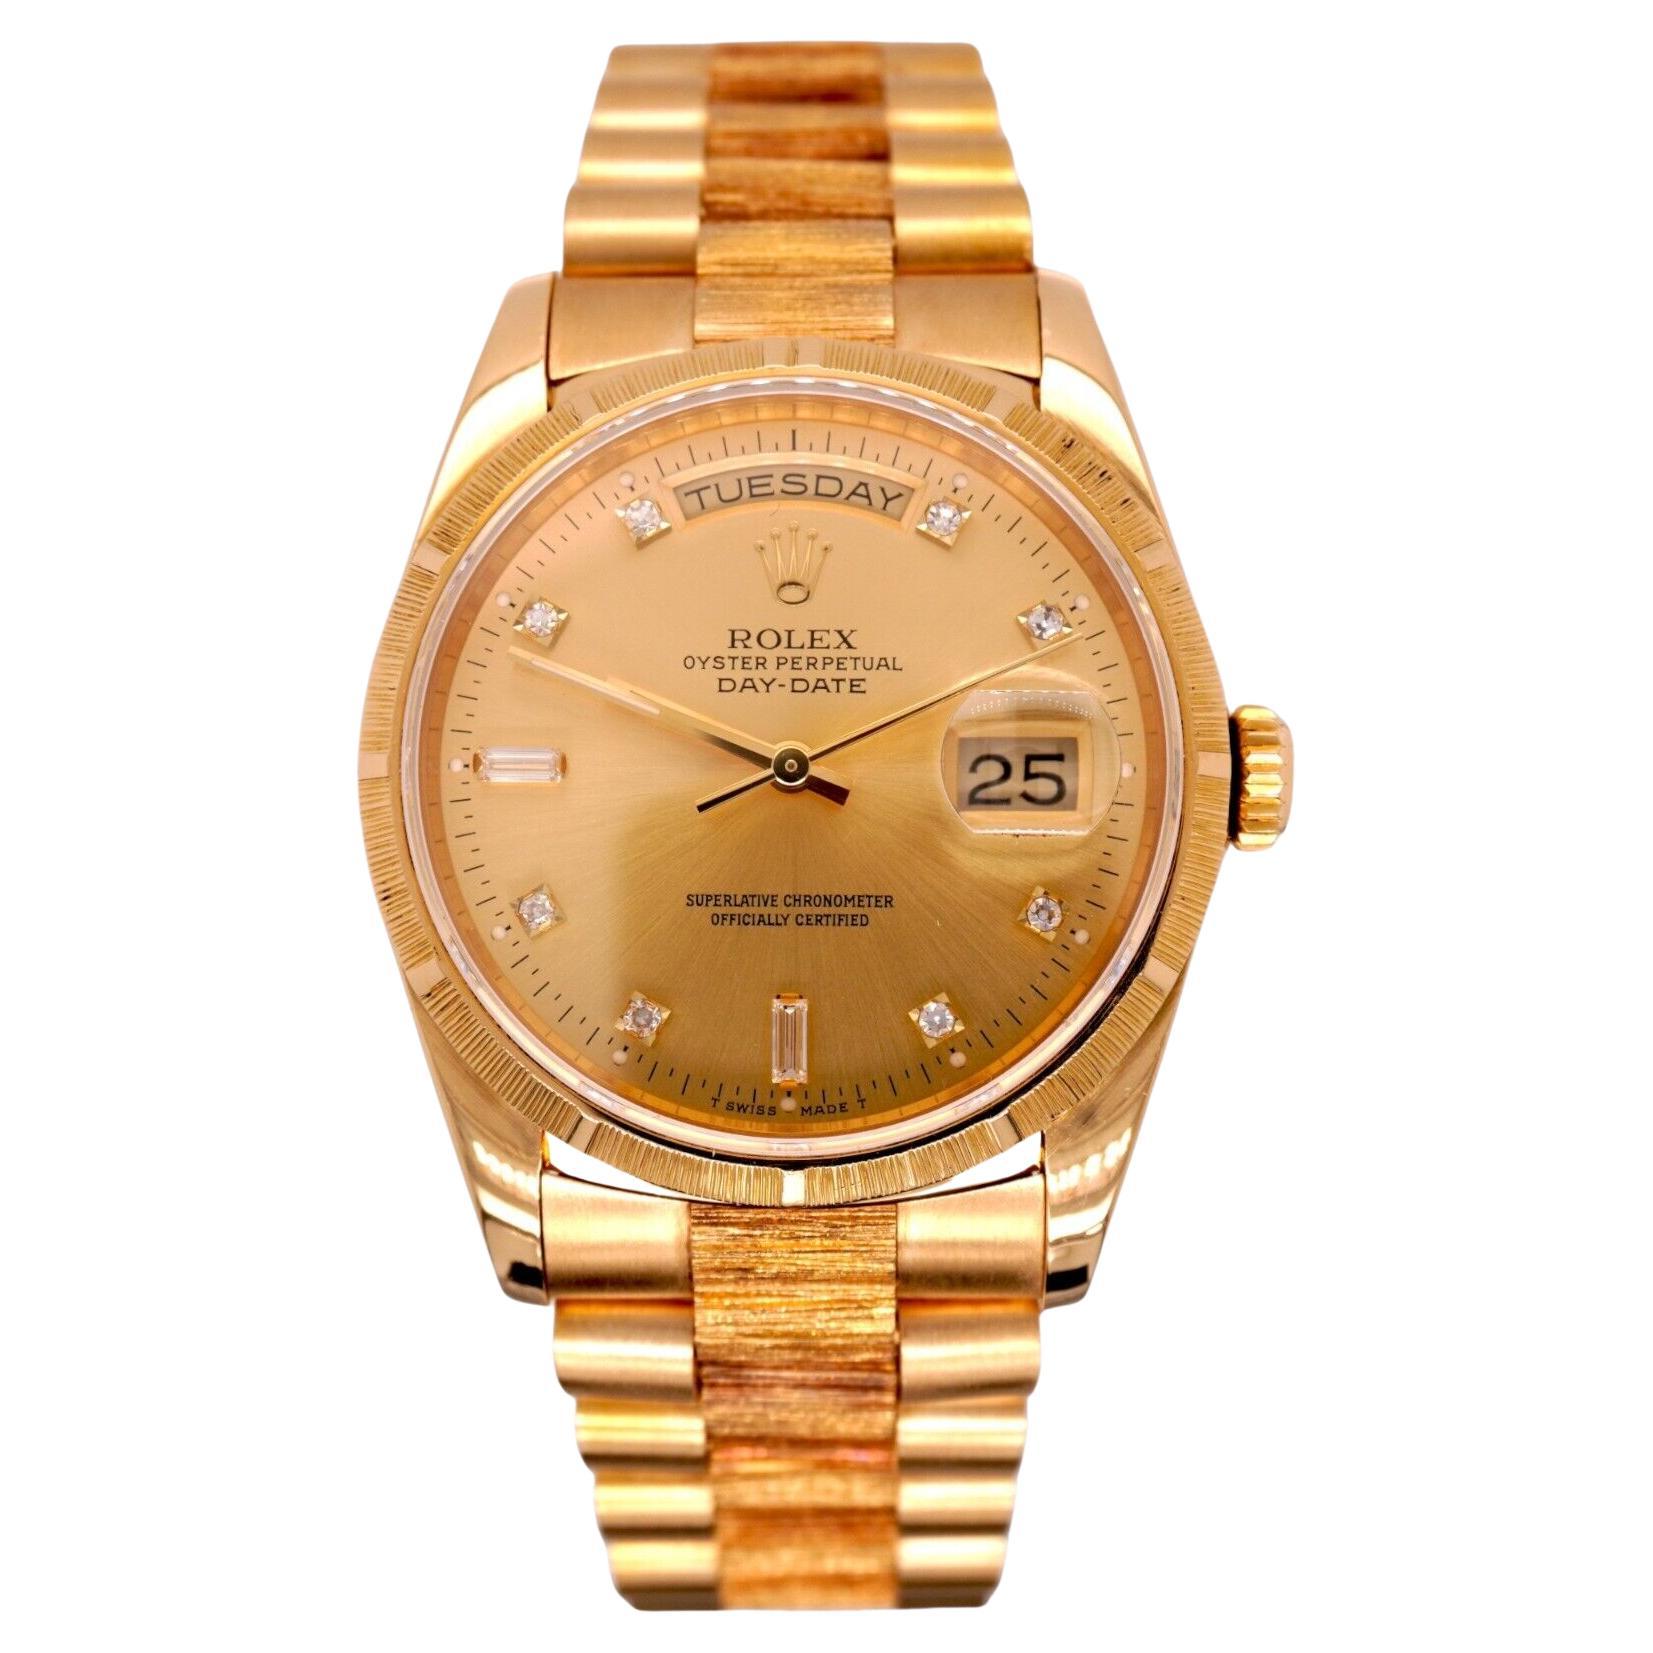 How much gold is in a Rolex?